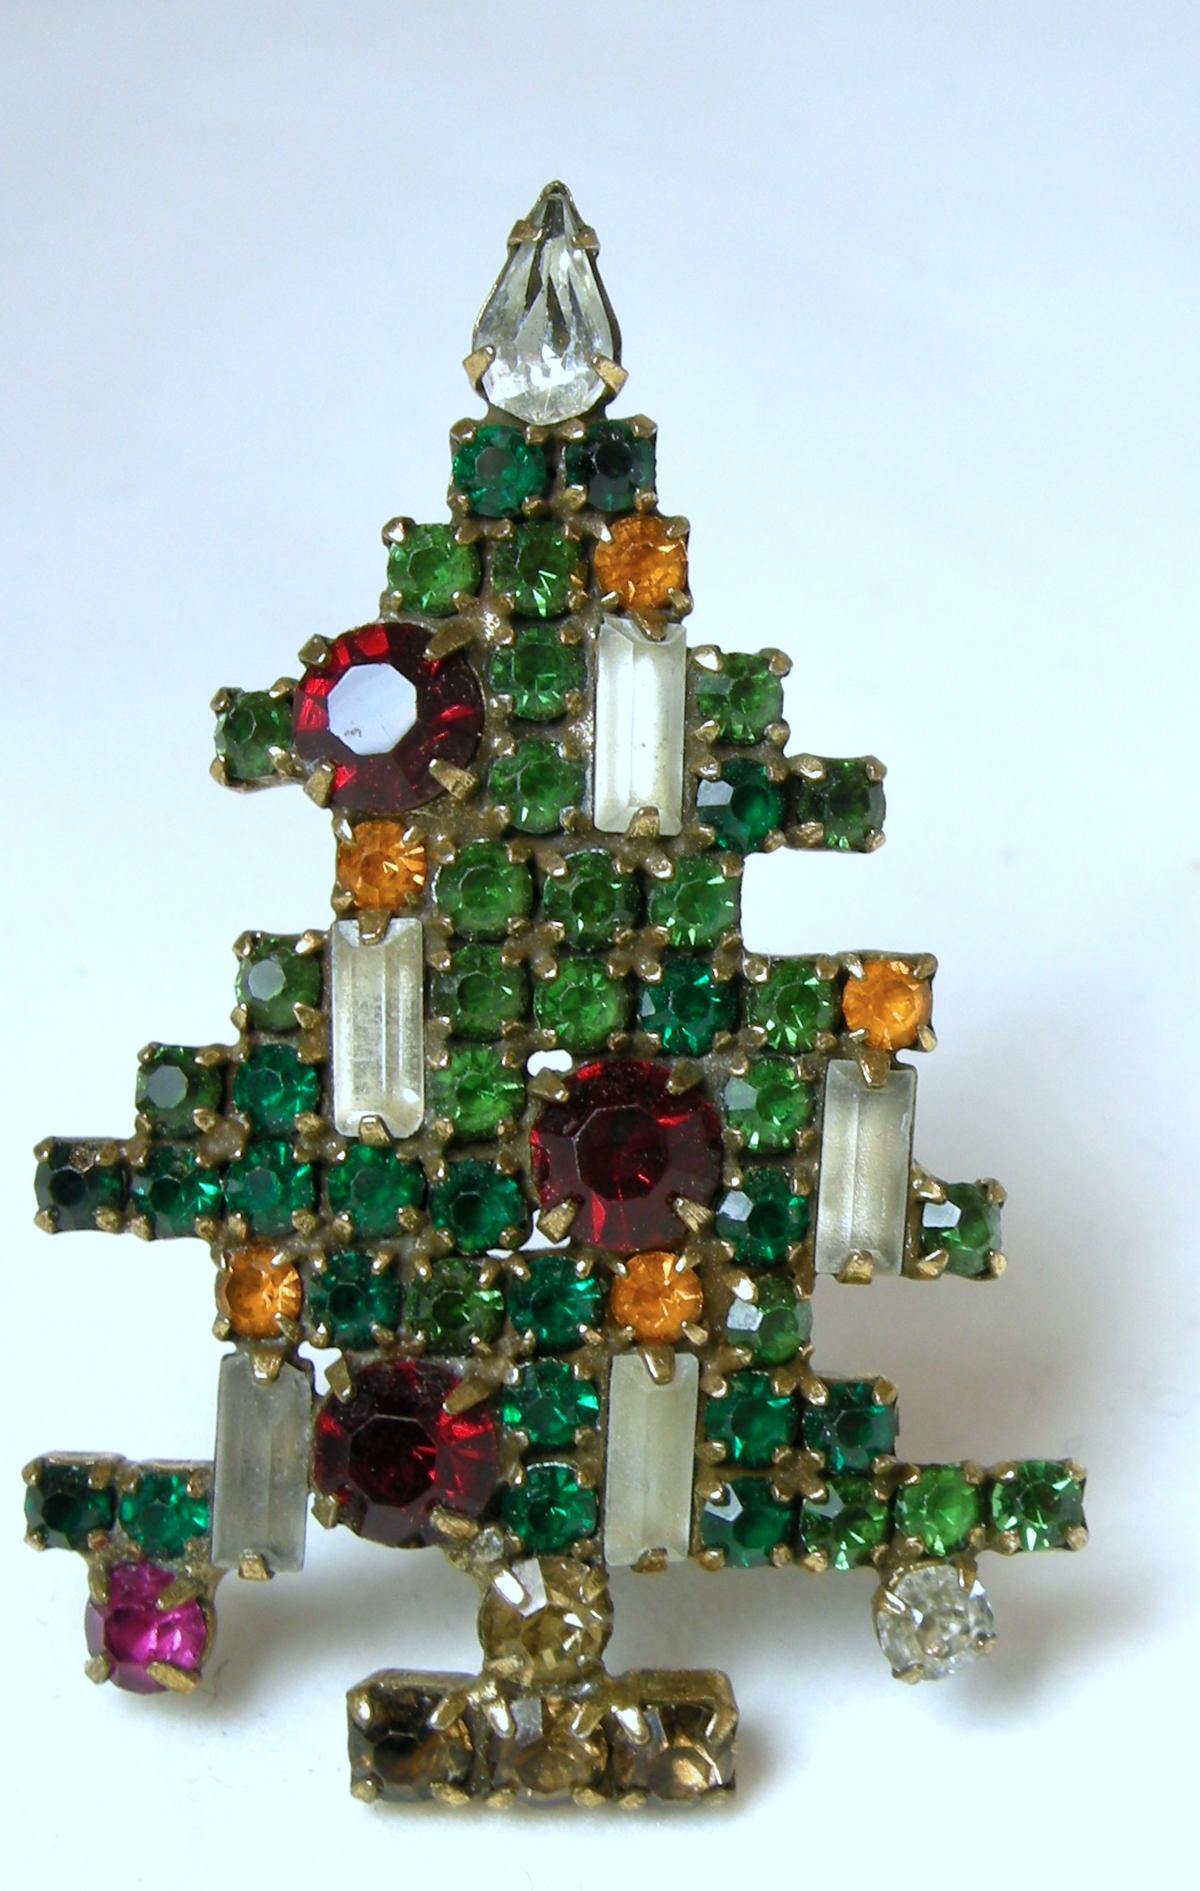 This vintage signed Weiss Christmas tree brooch has 5 candles standing amid multi-colored crystals in a gold tone setting. It is signed “Weiss” and measures 2-1/4” x 1-1/2”.  It’s in excellent condition.